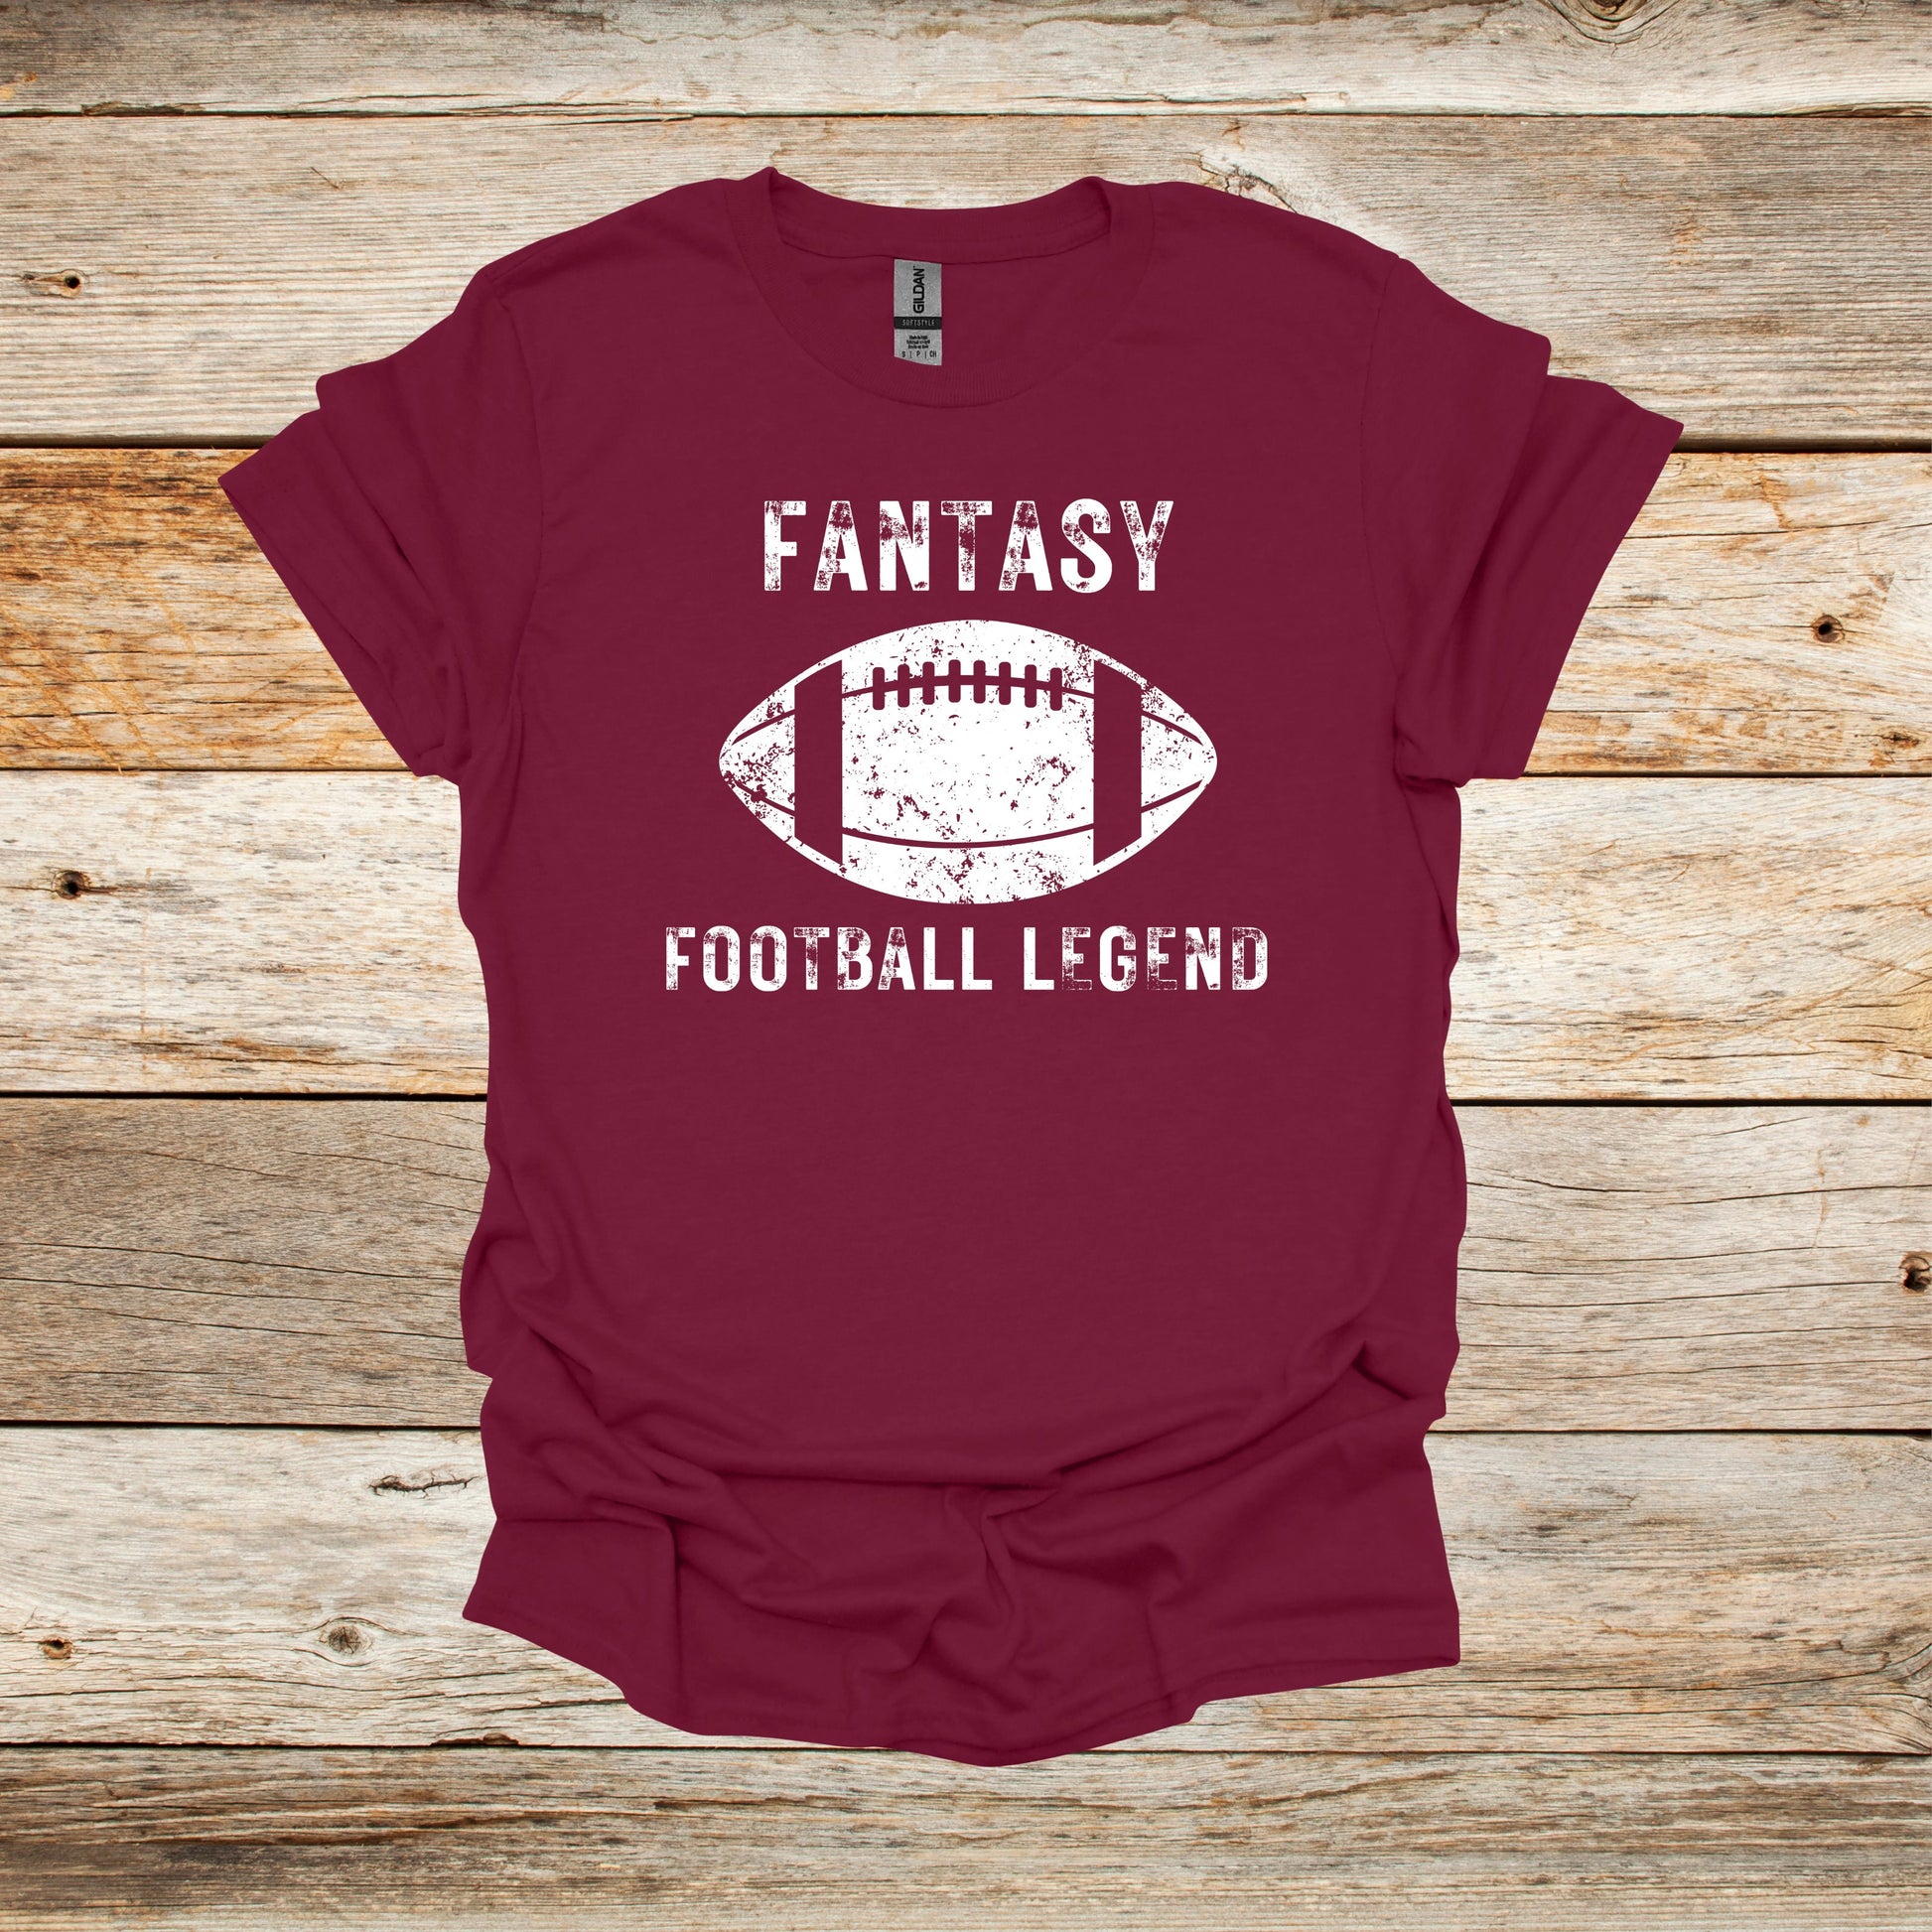 Football T-Shirt - Adult and Children's Tee Shirts - Fantasy Football - Sports T-Shirts Graphic Avenue Maroon Adult Small 